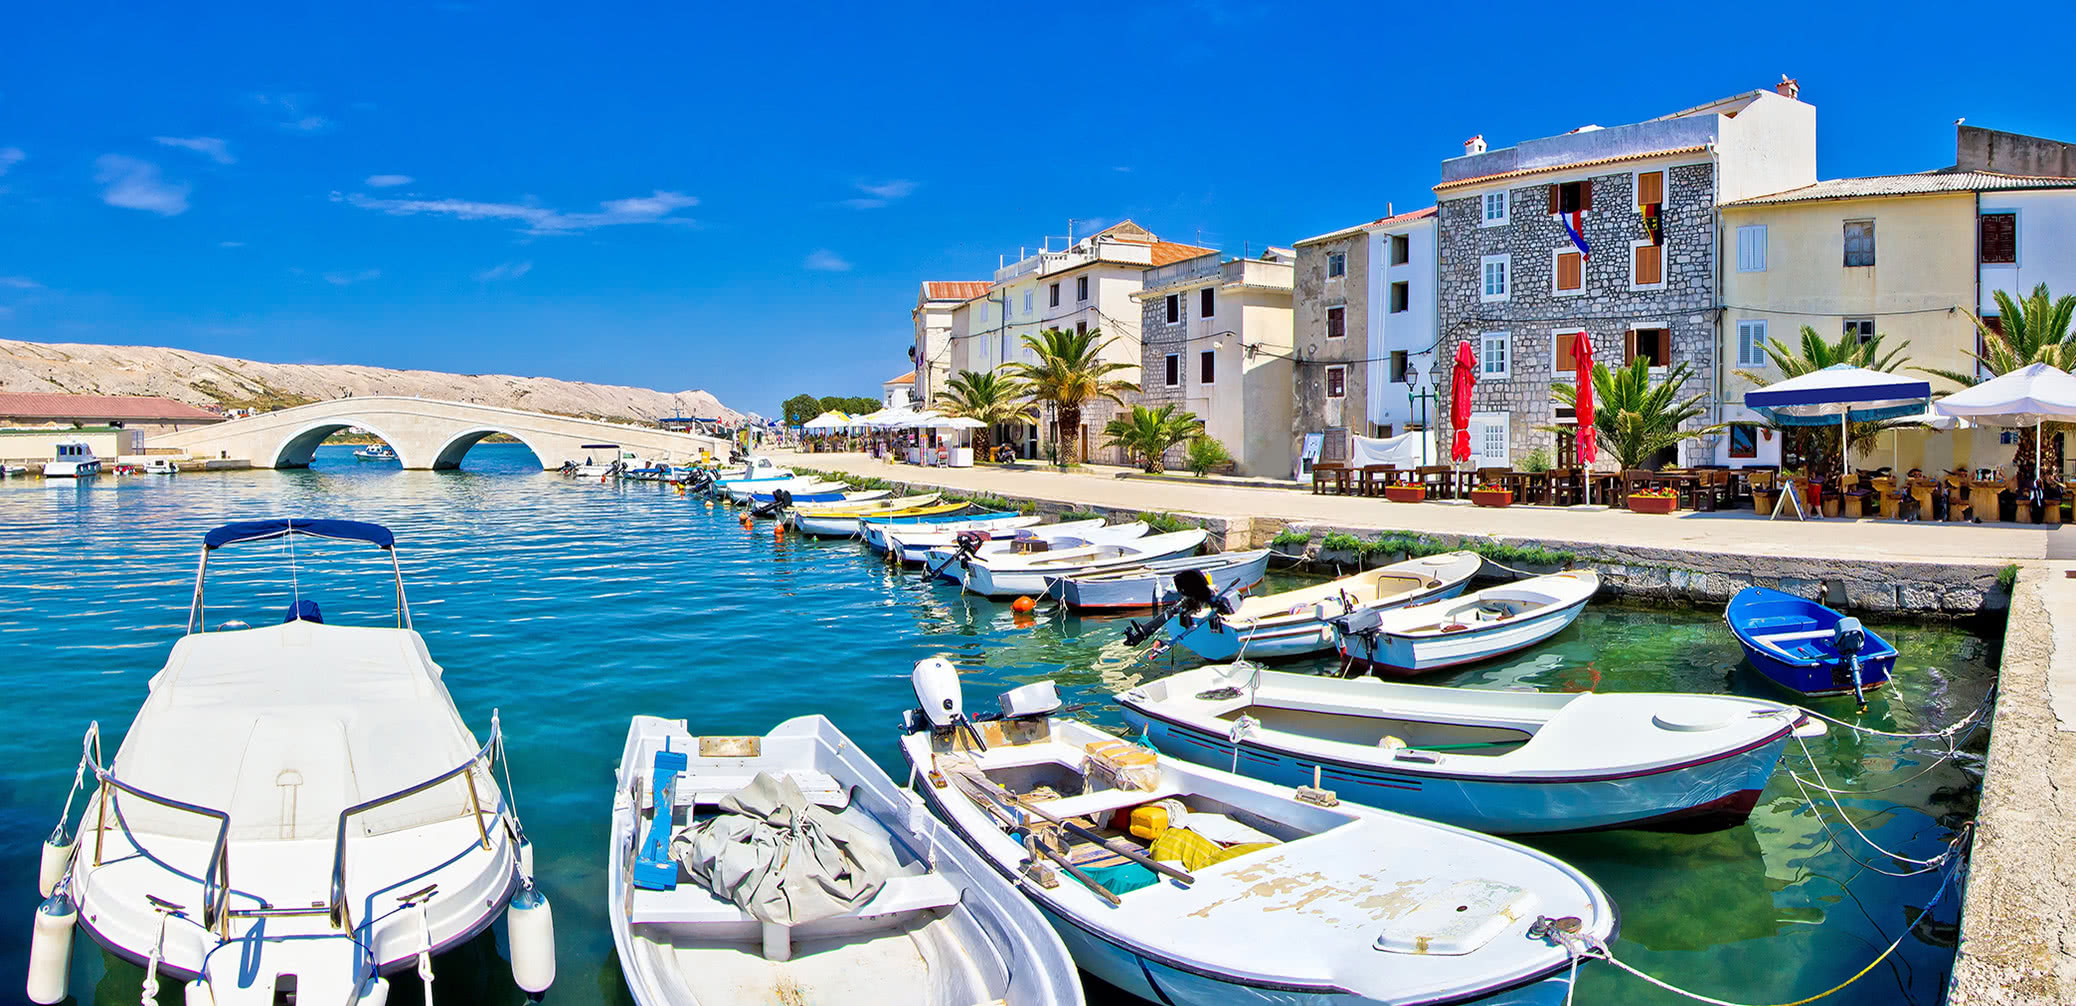 Top 5 Best Apartments On The Island Of Pag, Croatia